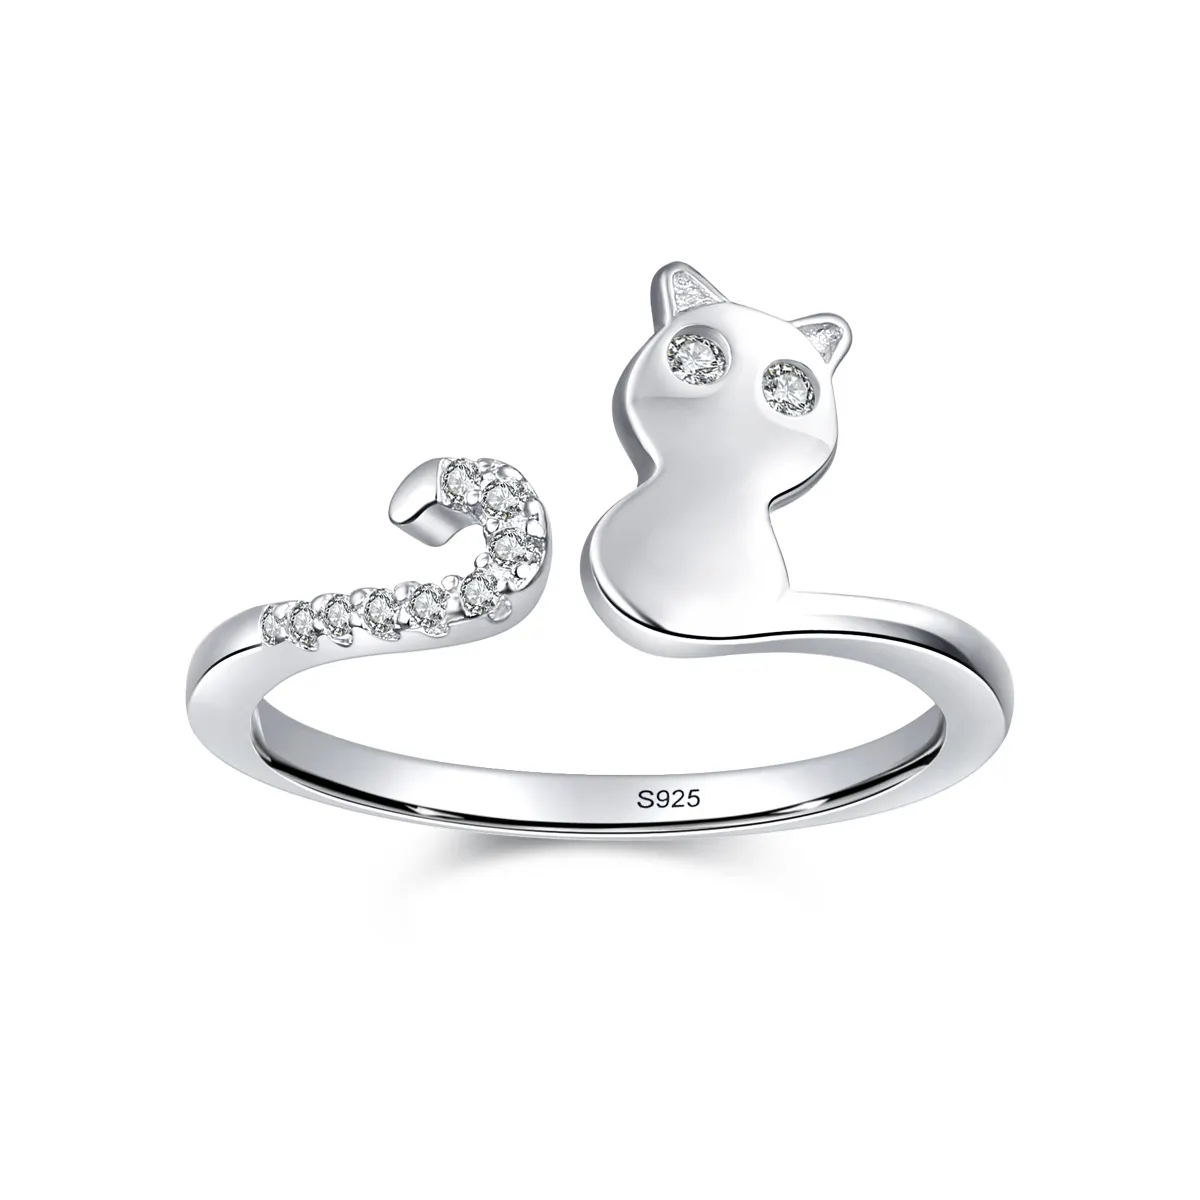 Ailmay 925 Sterling Silver Cute Cats Shining CZ Adjustable Finger Ring For Women Charm Animal Ring Christmas Gifts Fine Jewelry